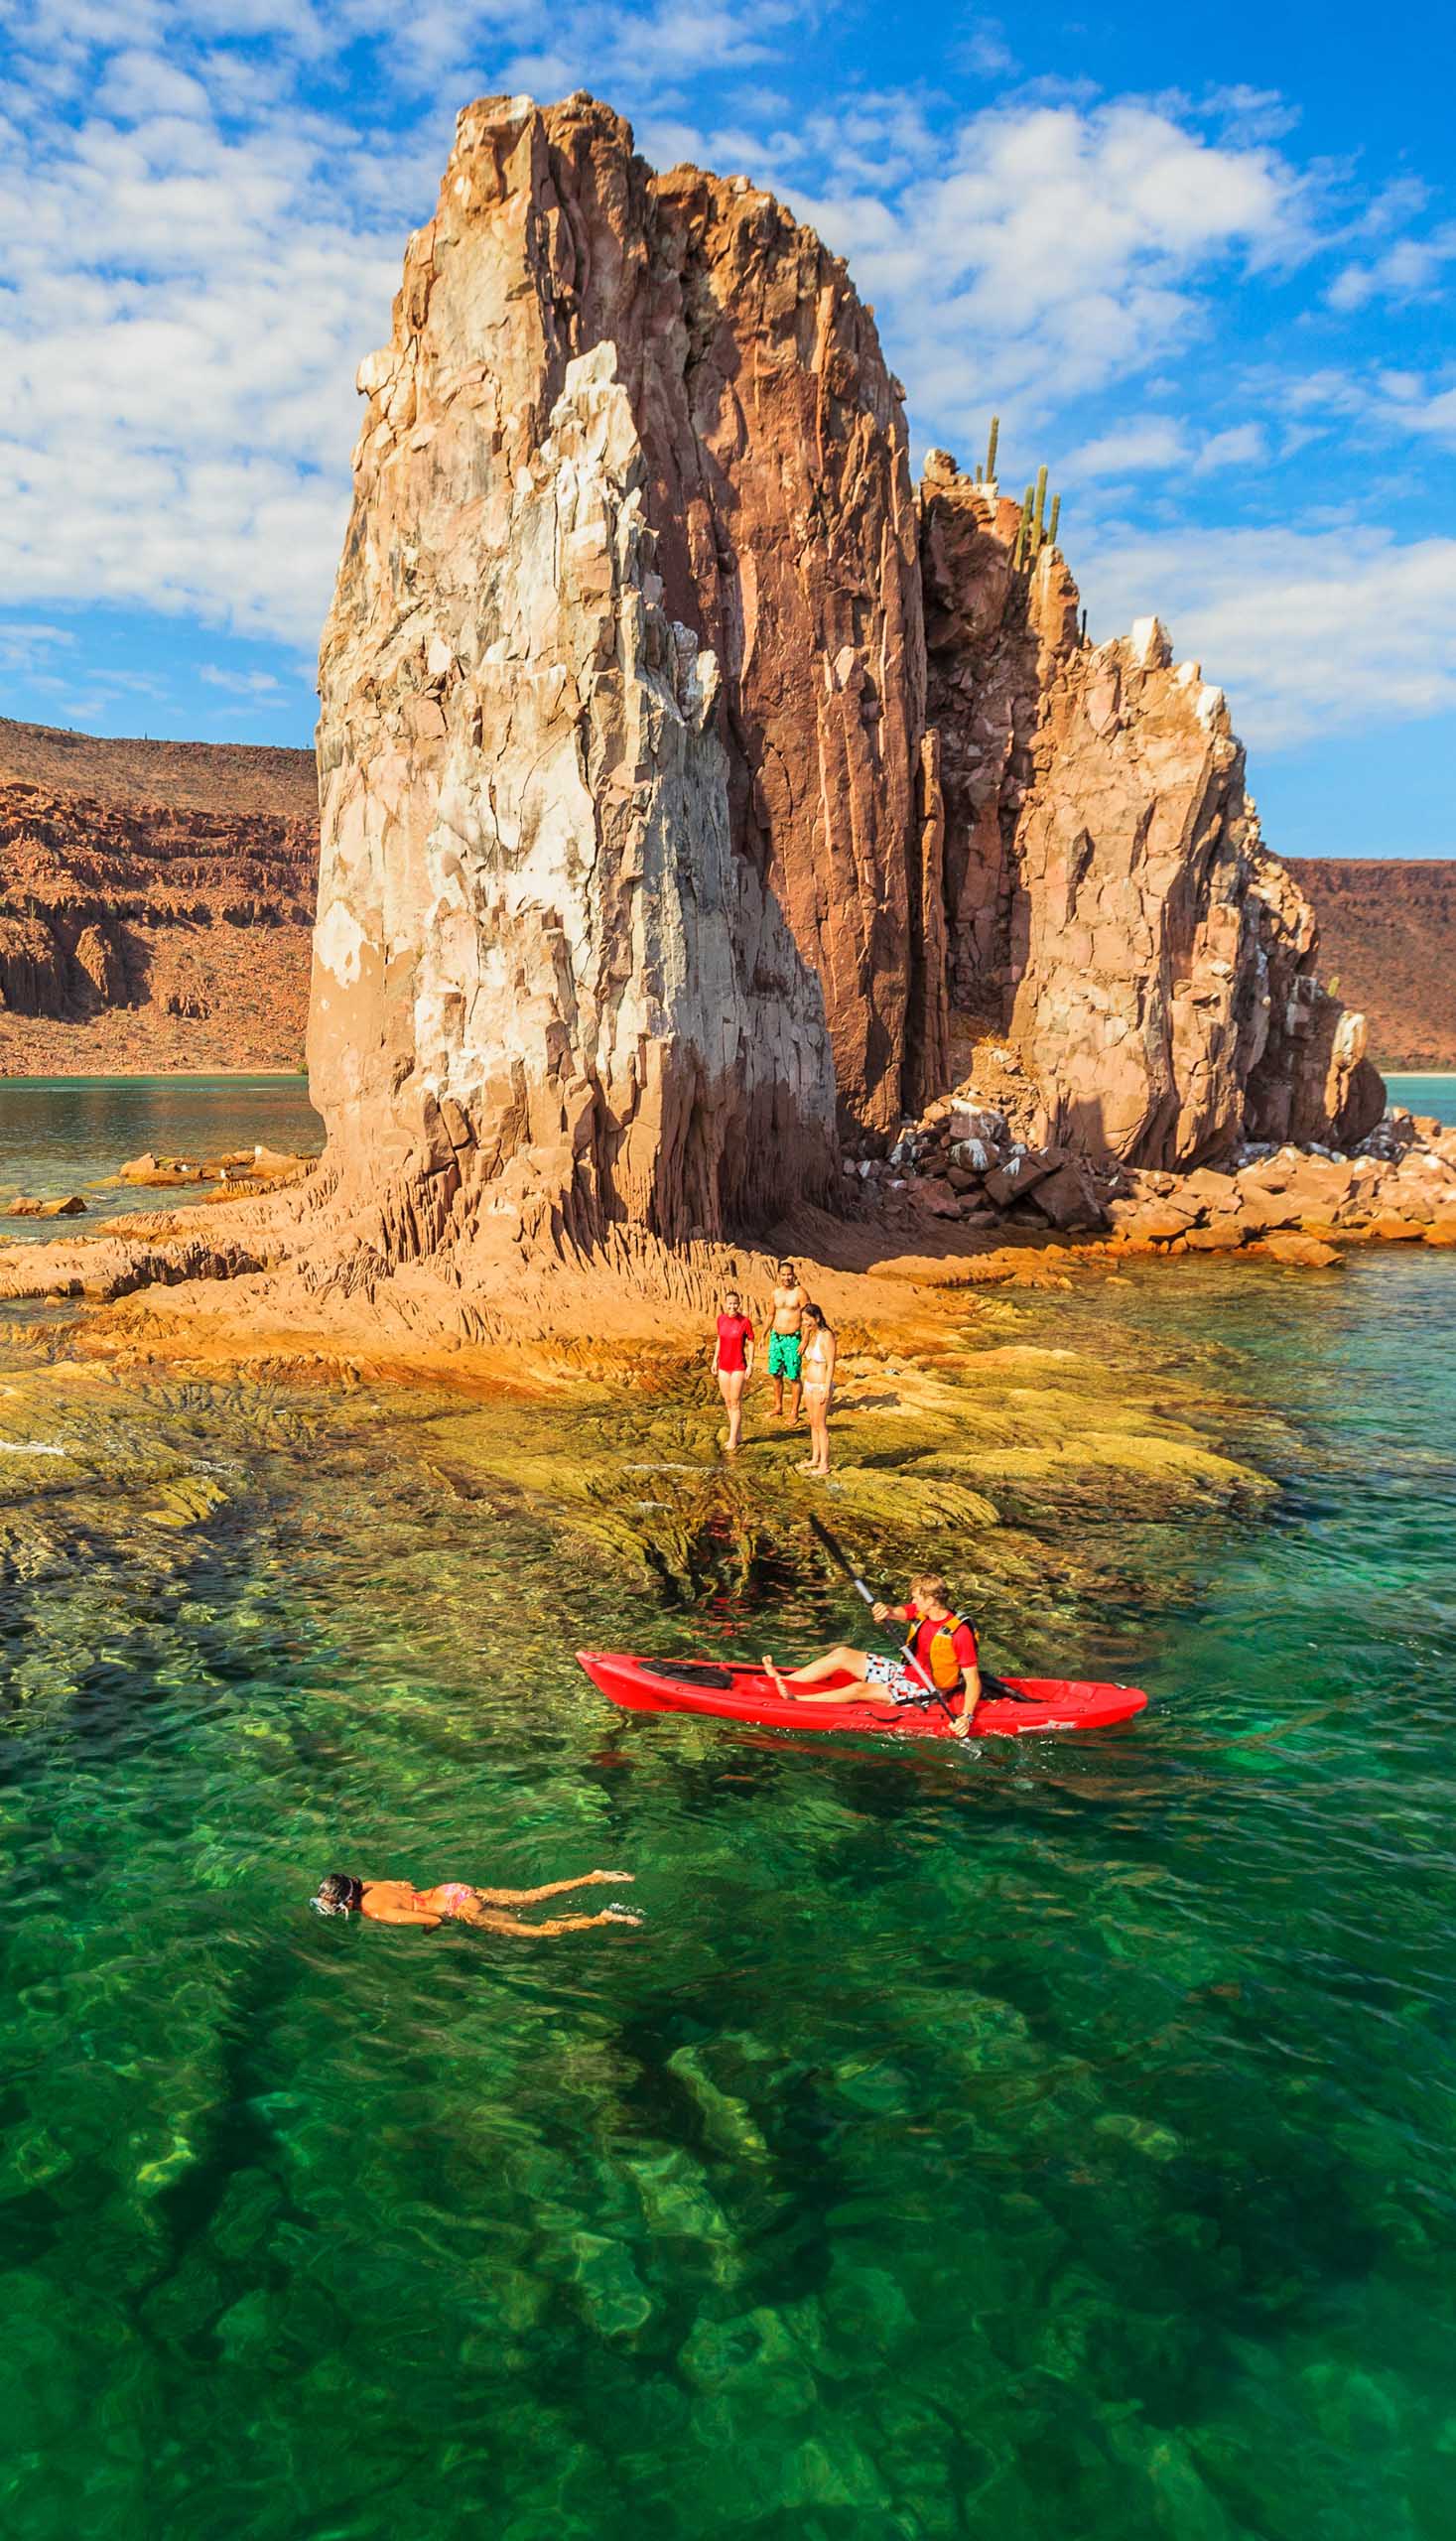 A group of people kayaking in Mexico.